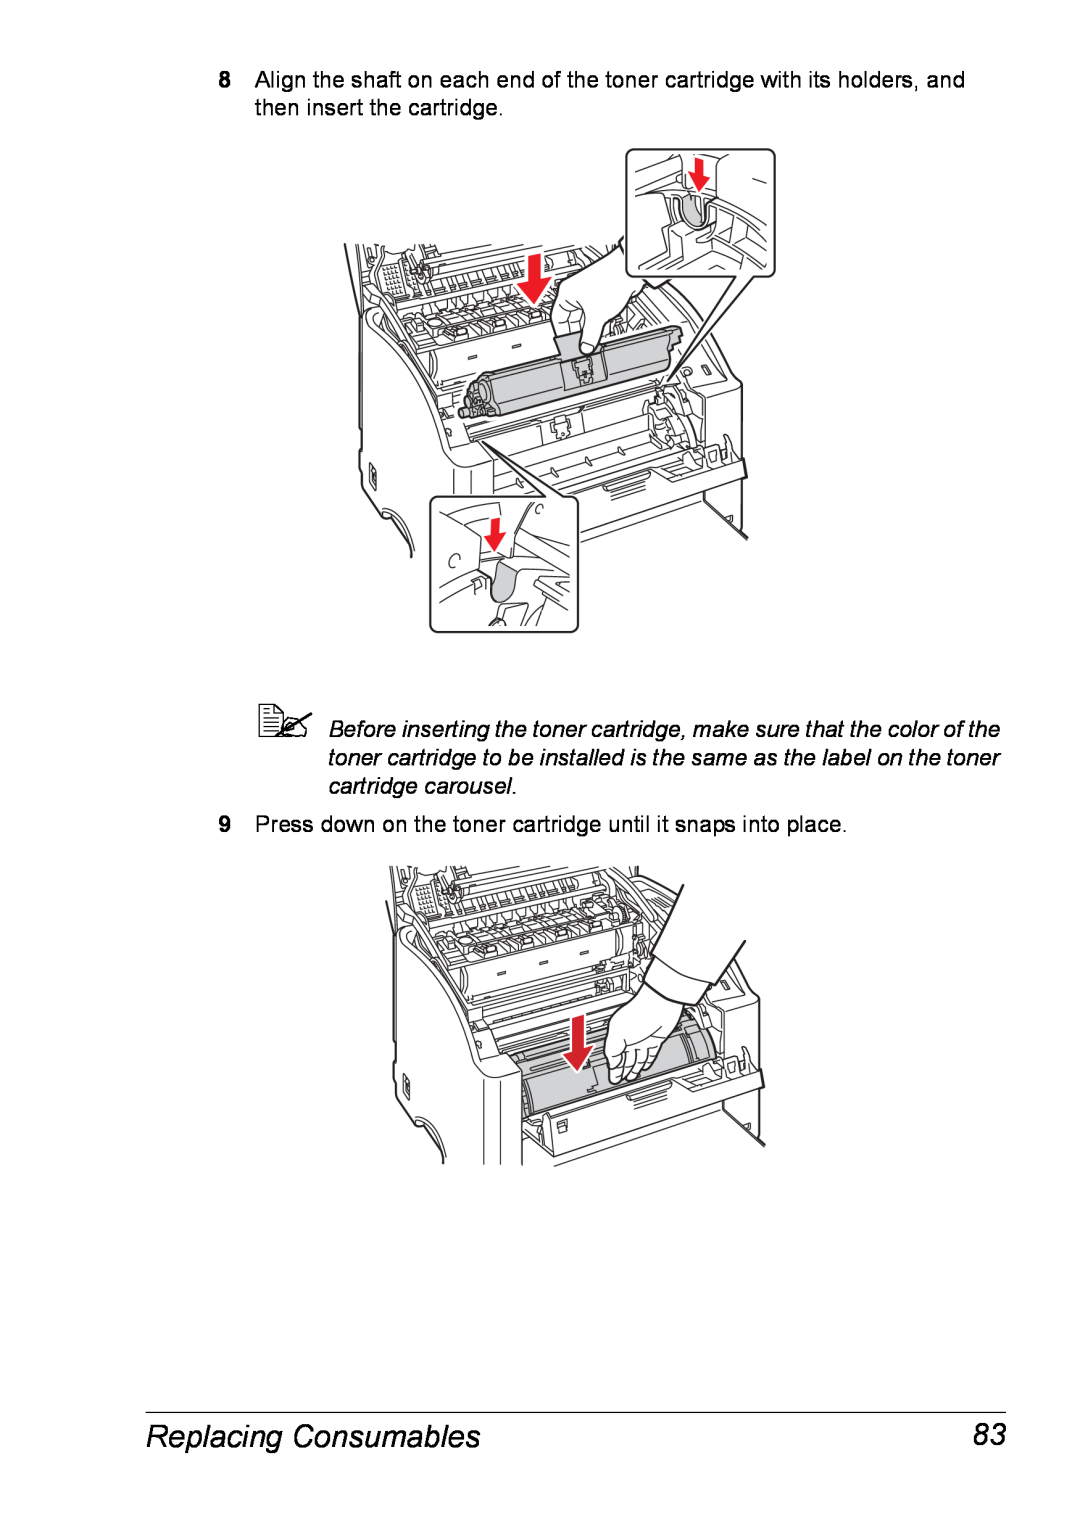 Xerox 6120 manual Replacing Consumables, Press down on the toner cartridge until it snaps into place 